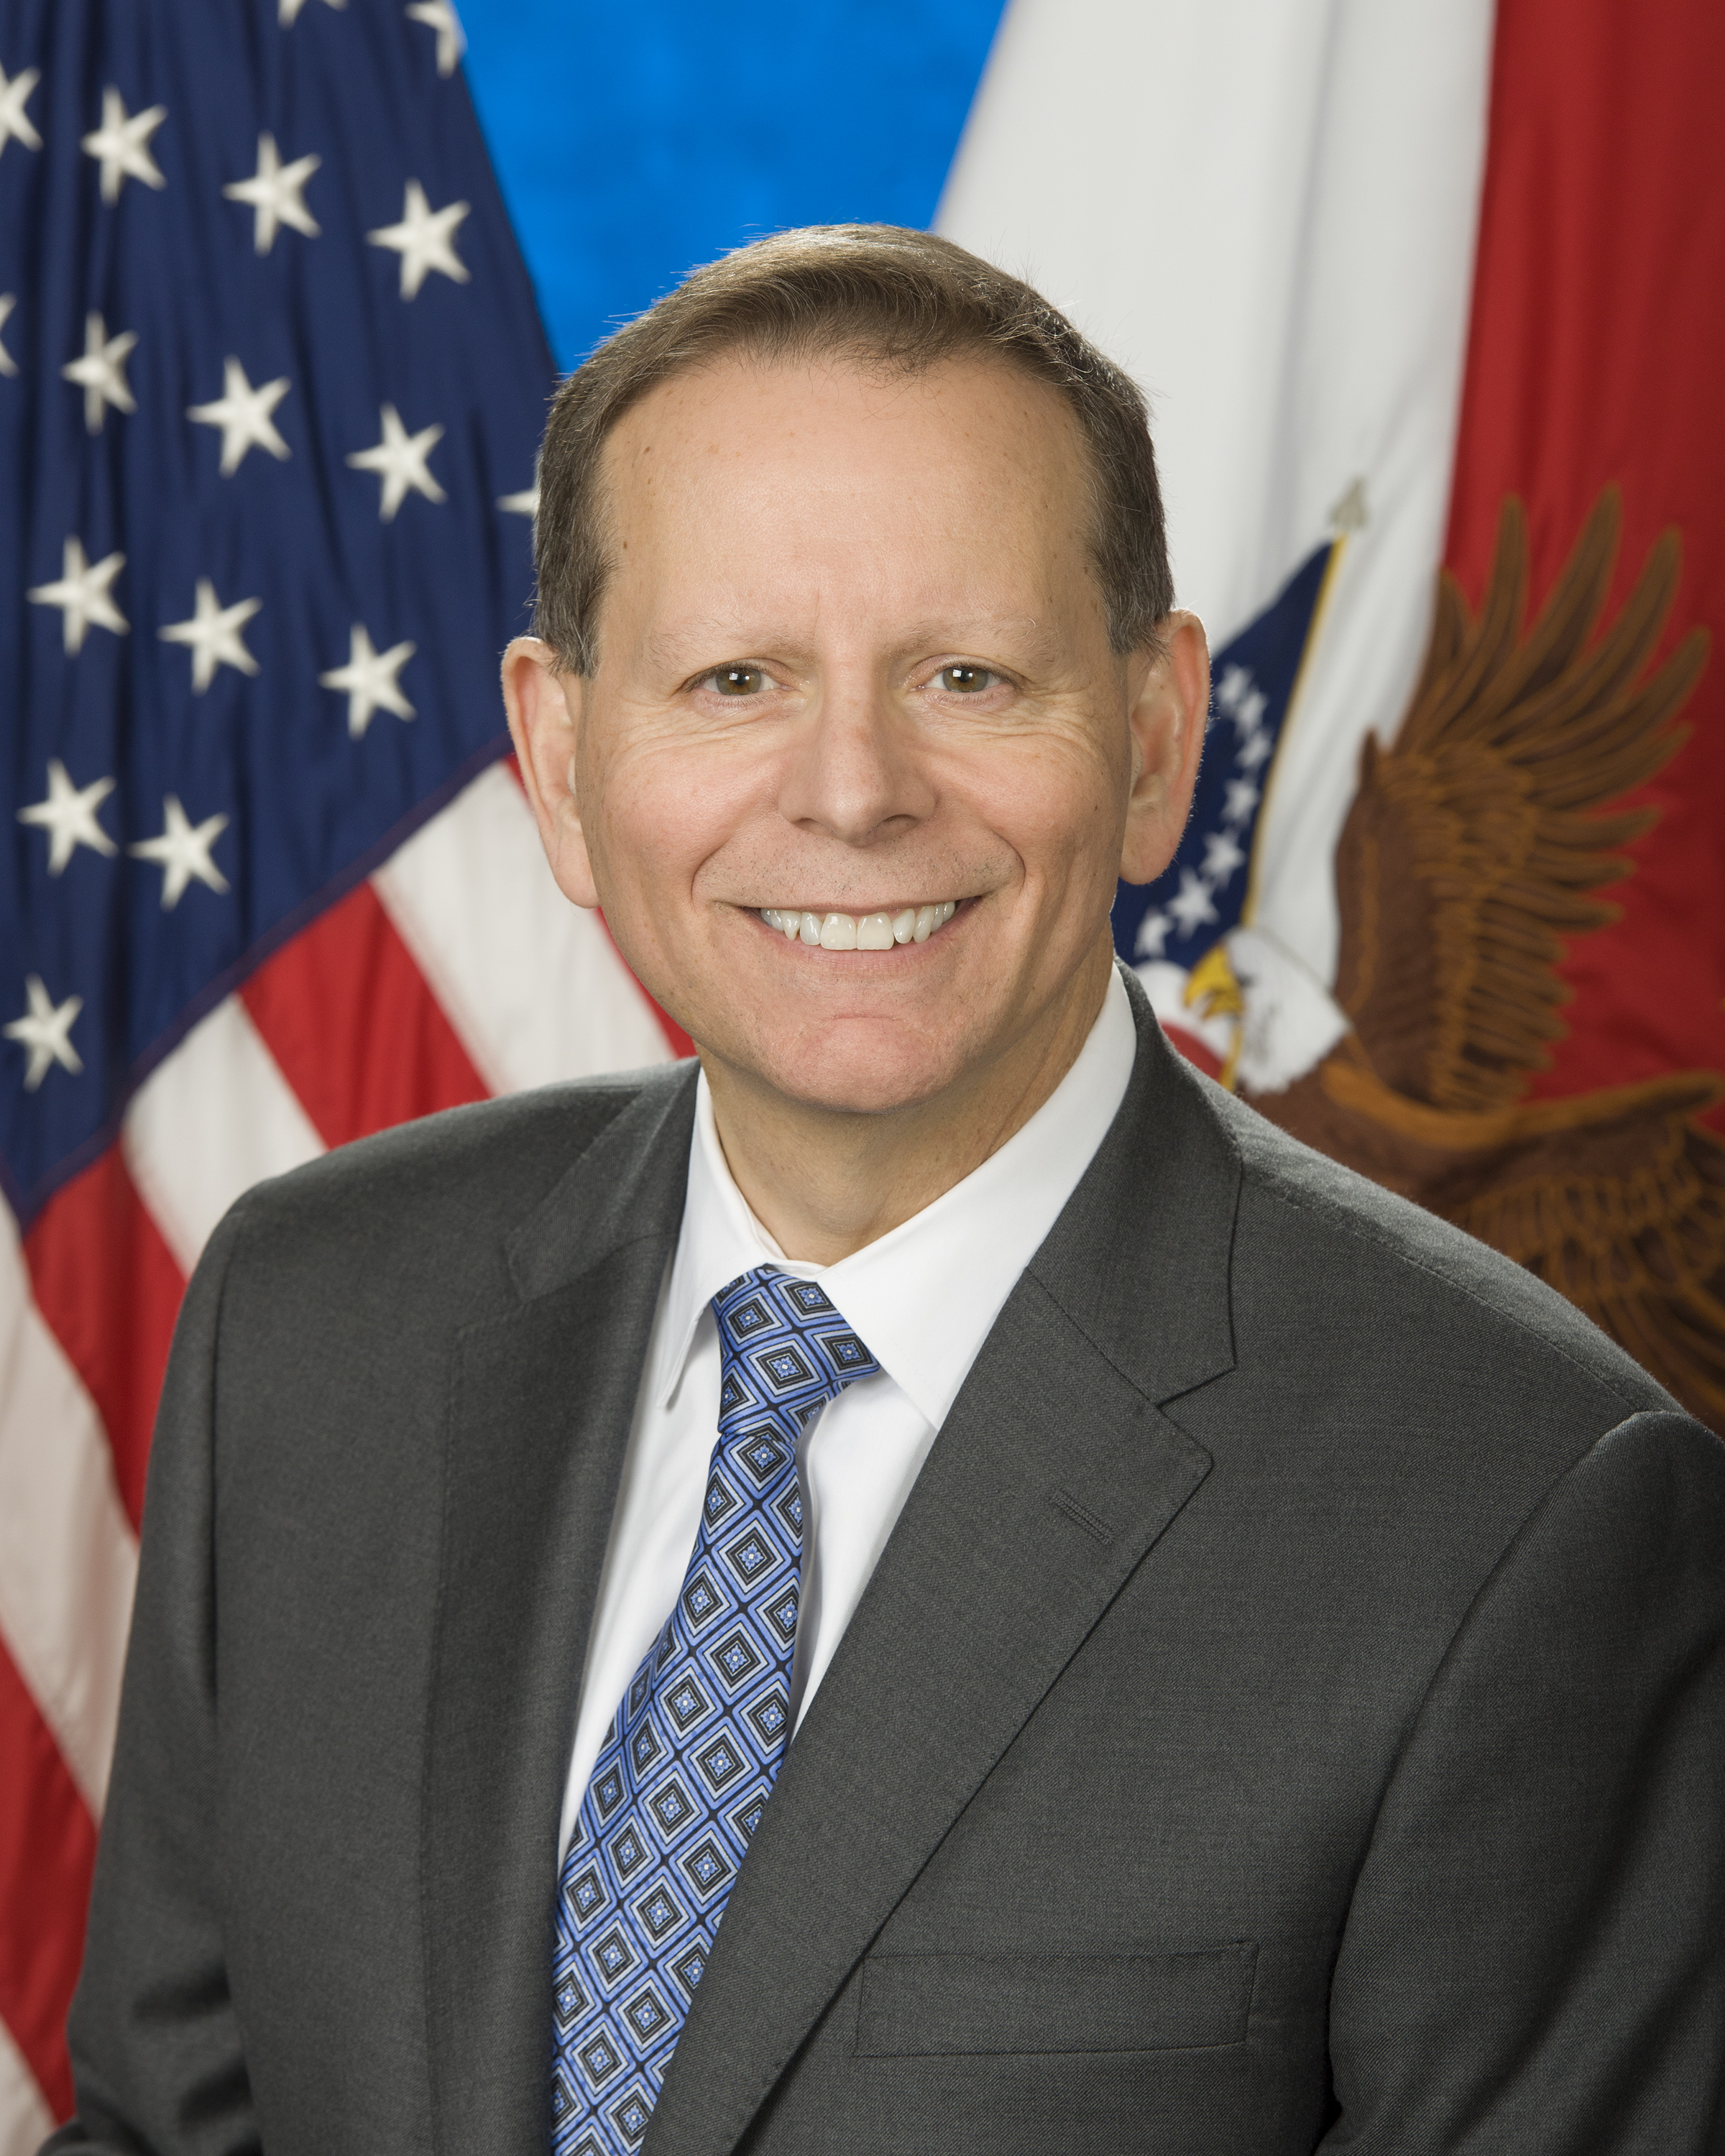 Paul Lawrence, Under Secretary for Benefits at the Veterans Benefits Administration